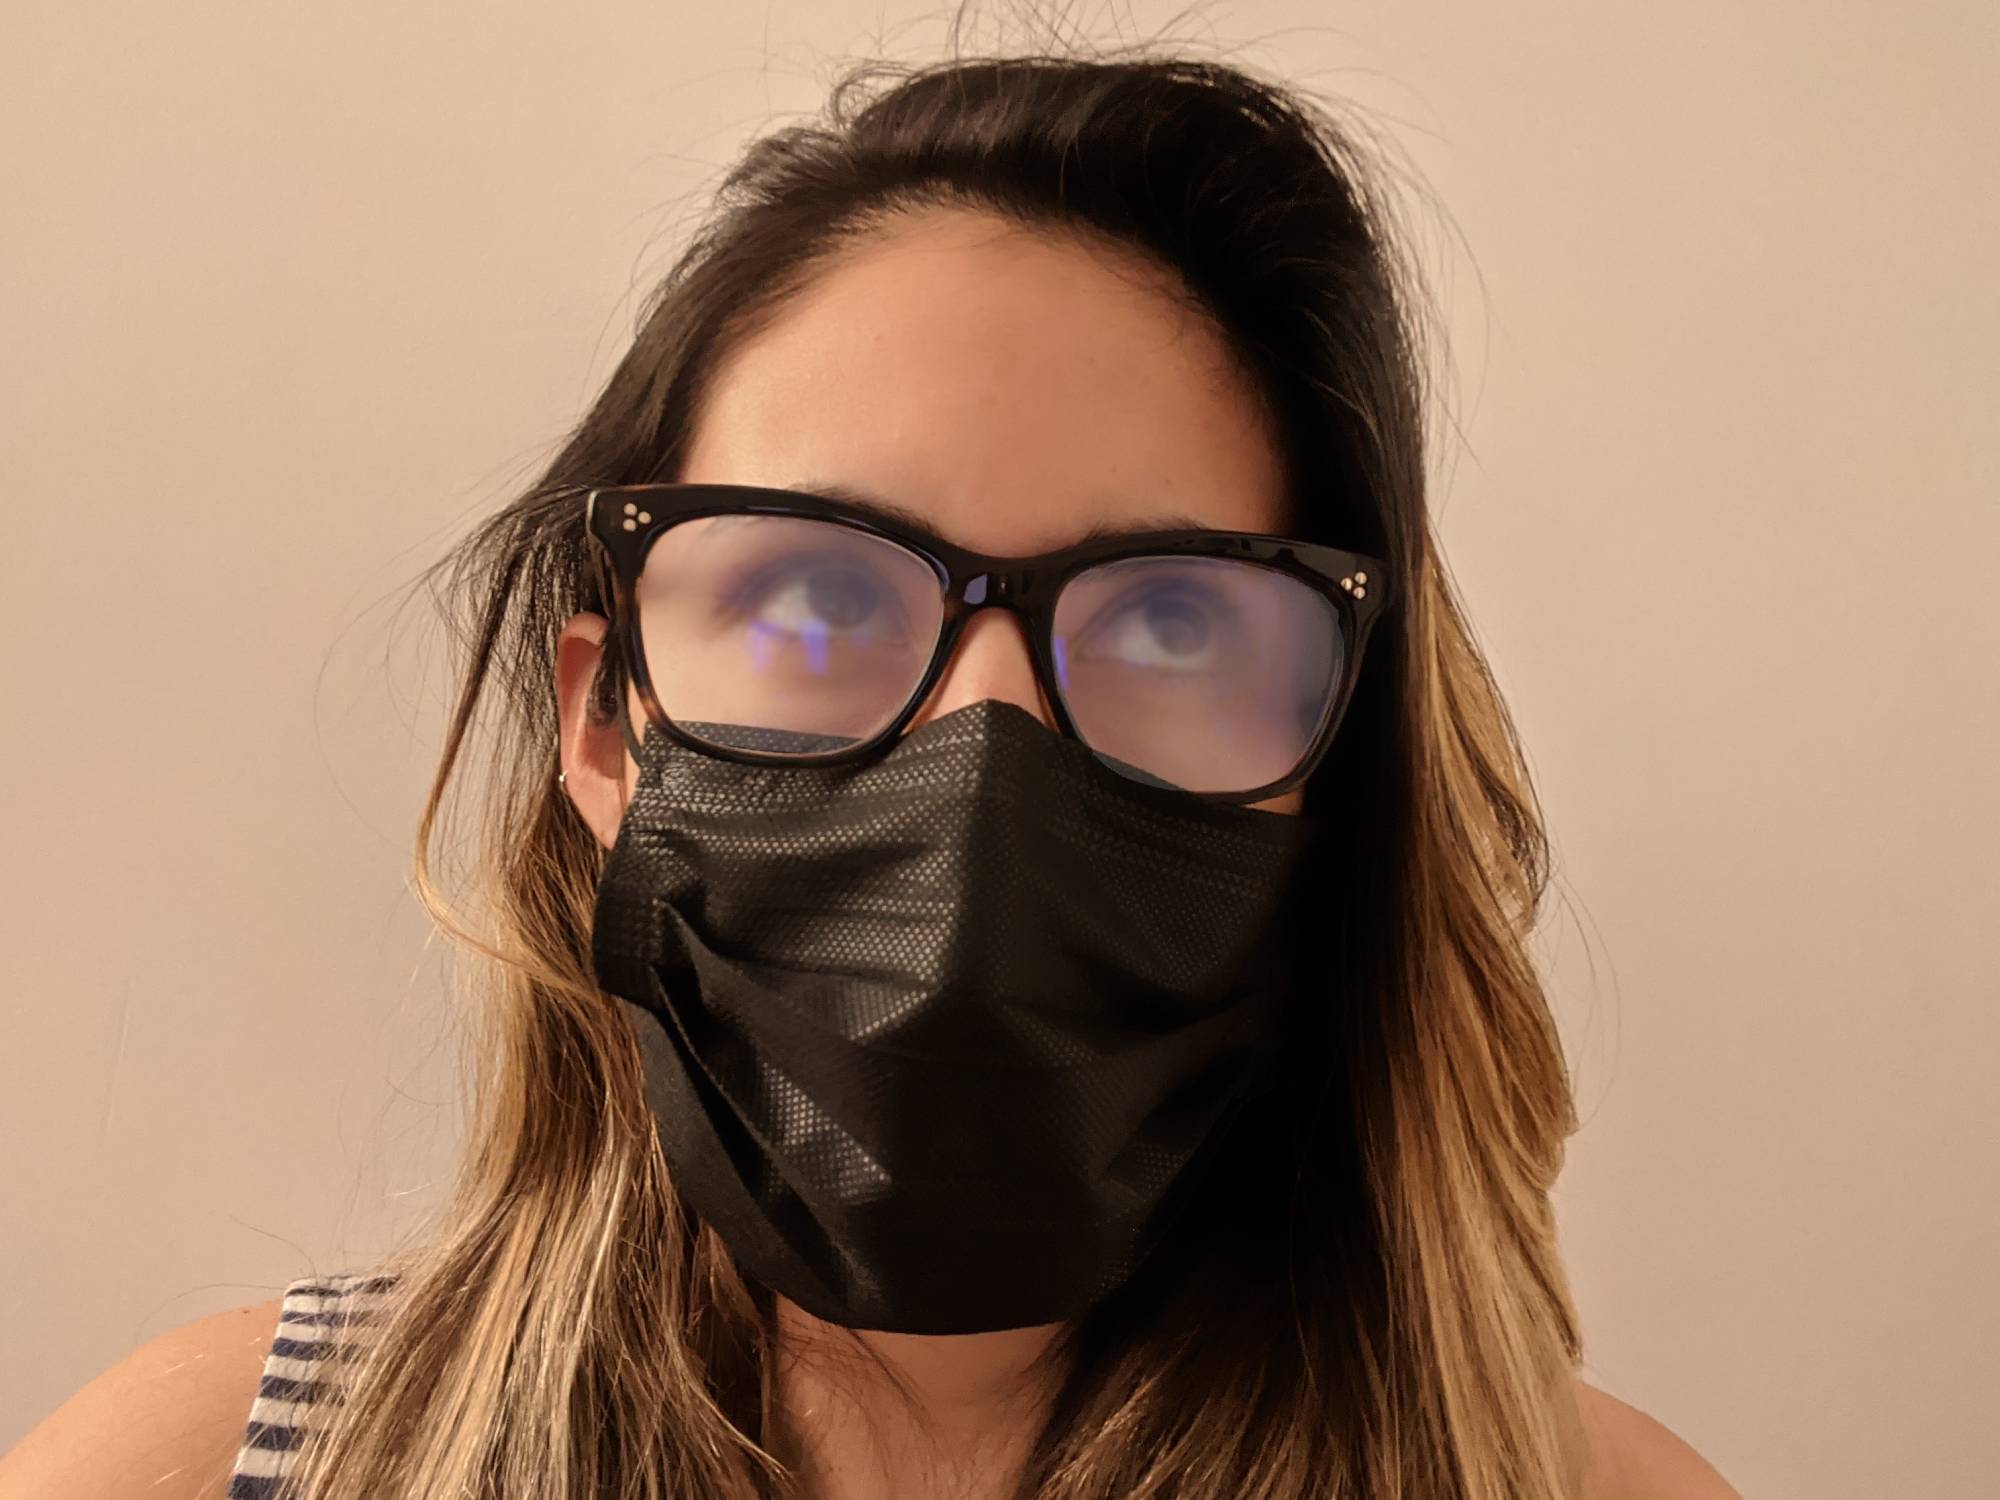 How to Keep Glasses from Fogging With a Mask: 6 Helpful Tips